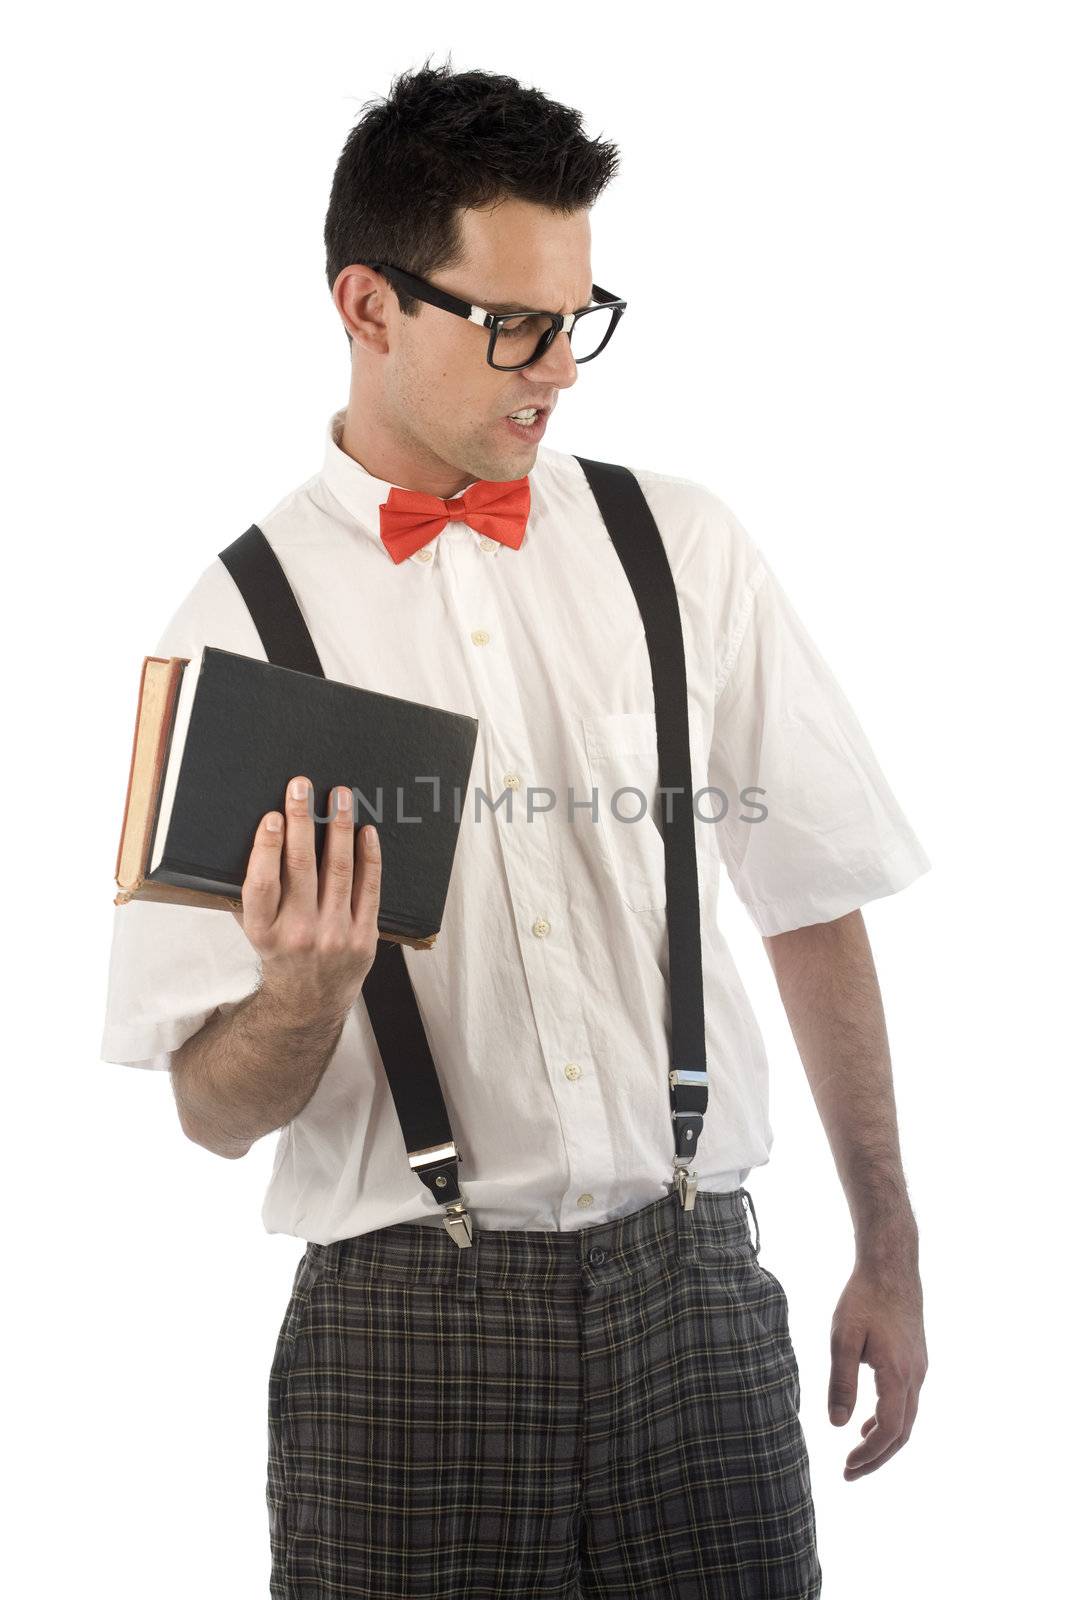 A young, caucasian nerd working out with books, isolated on a white background.